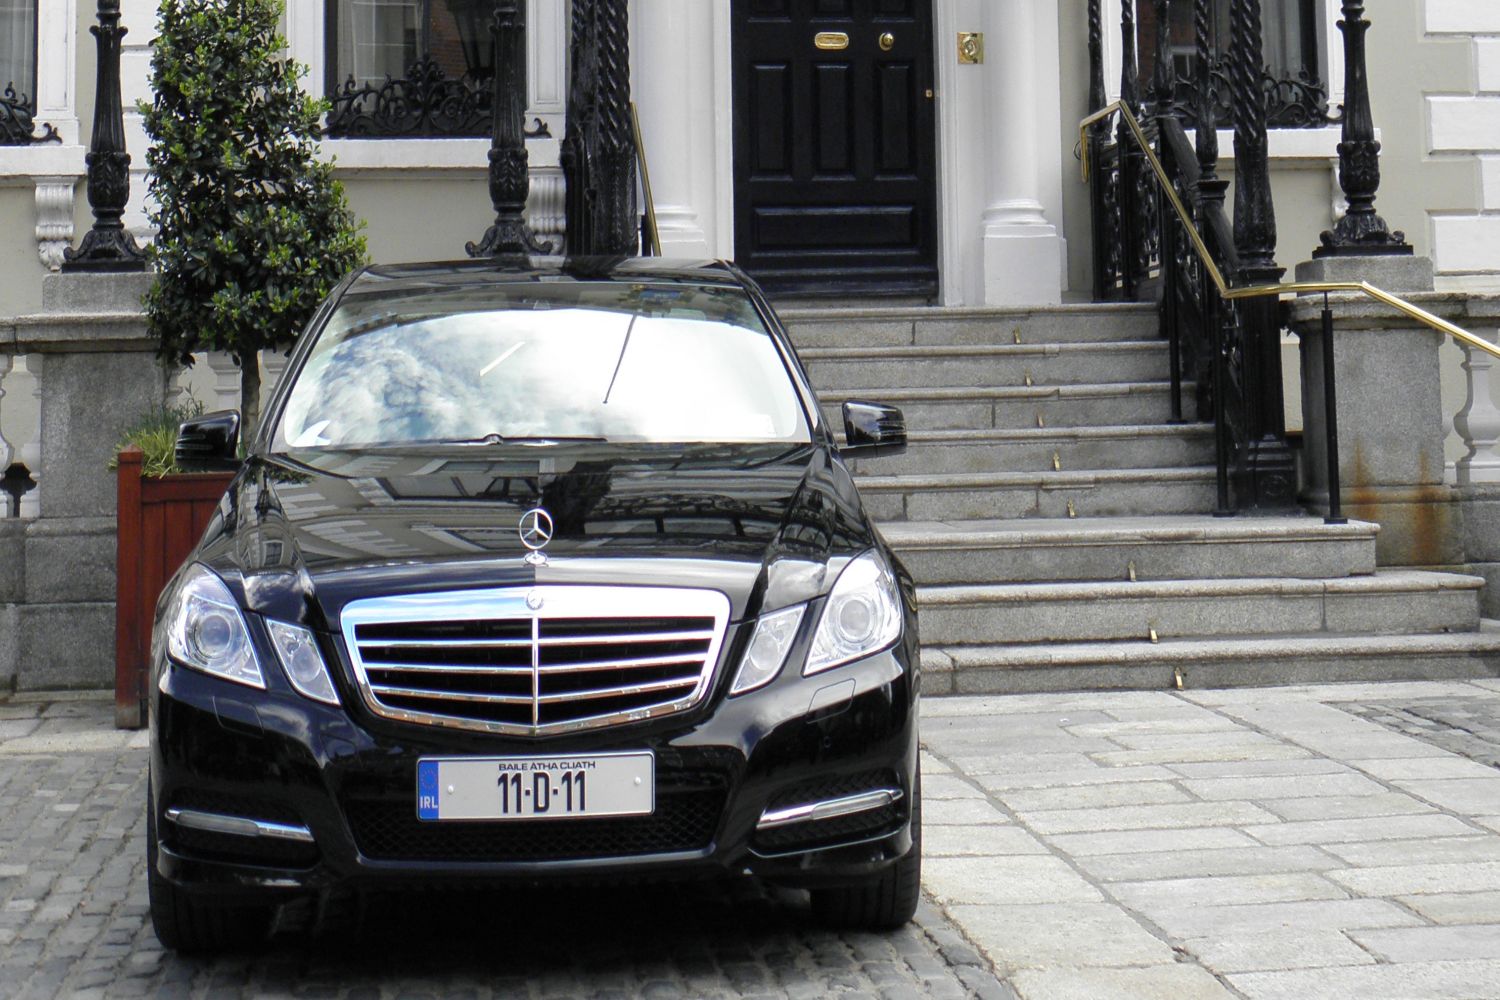 Lord Mayor's Car outside Mansion Housea